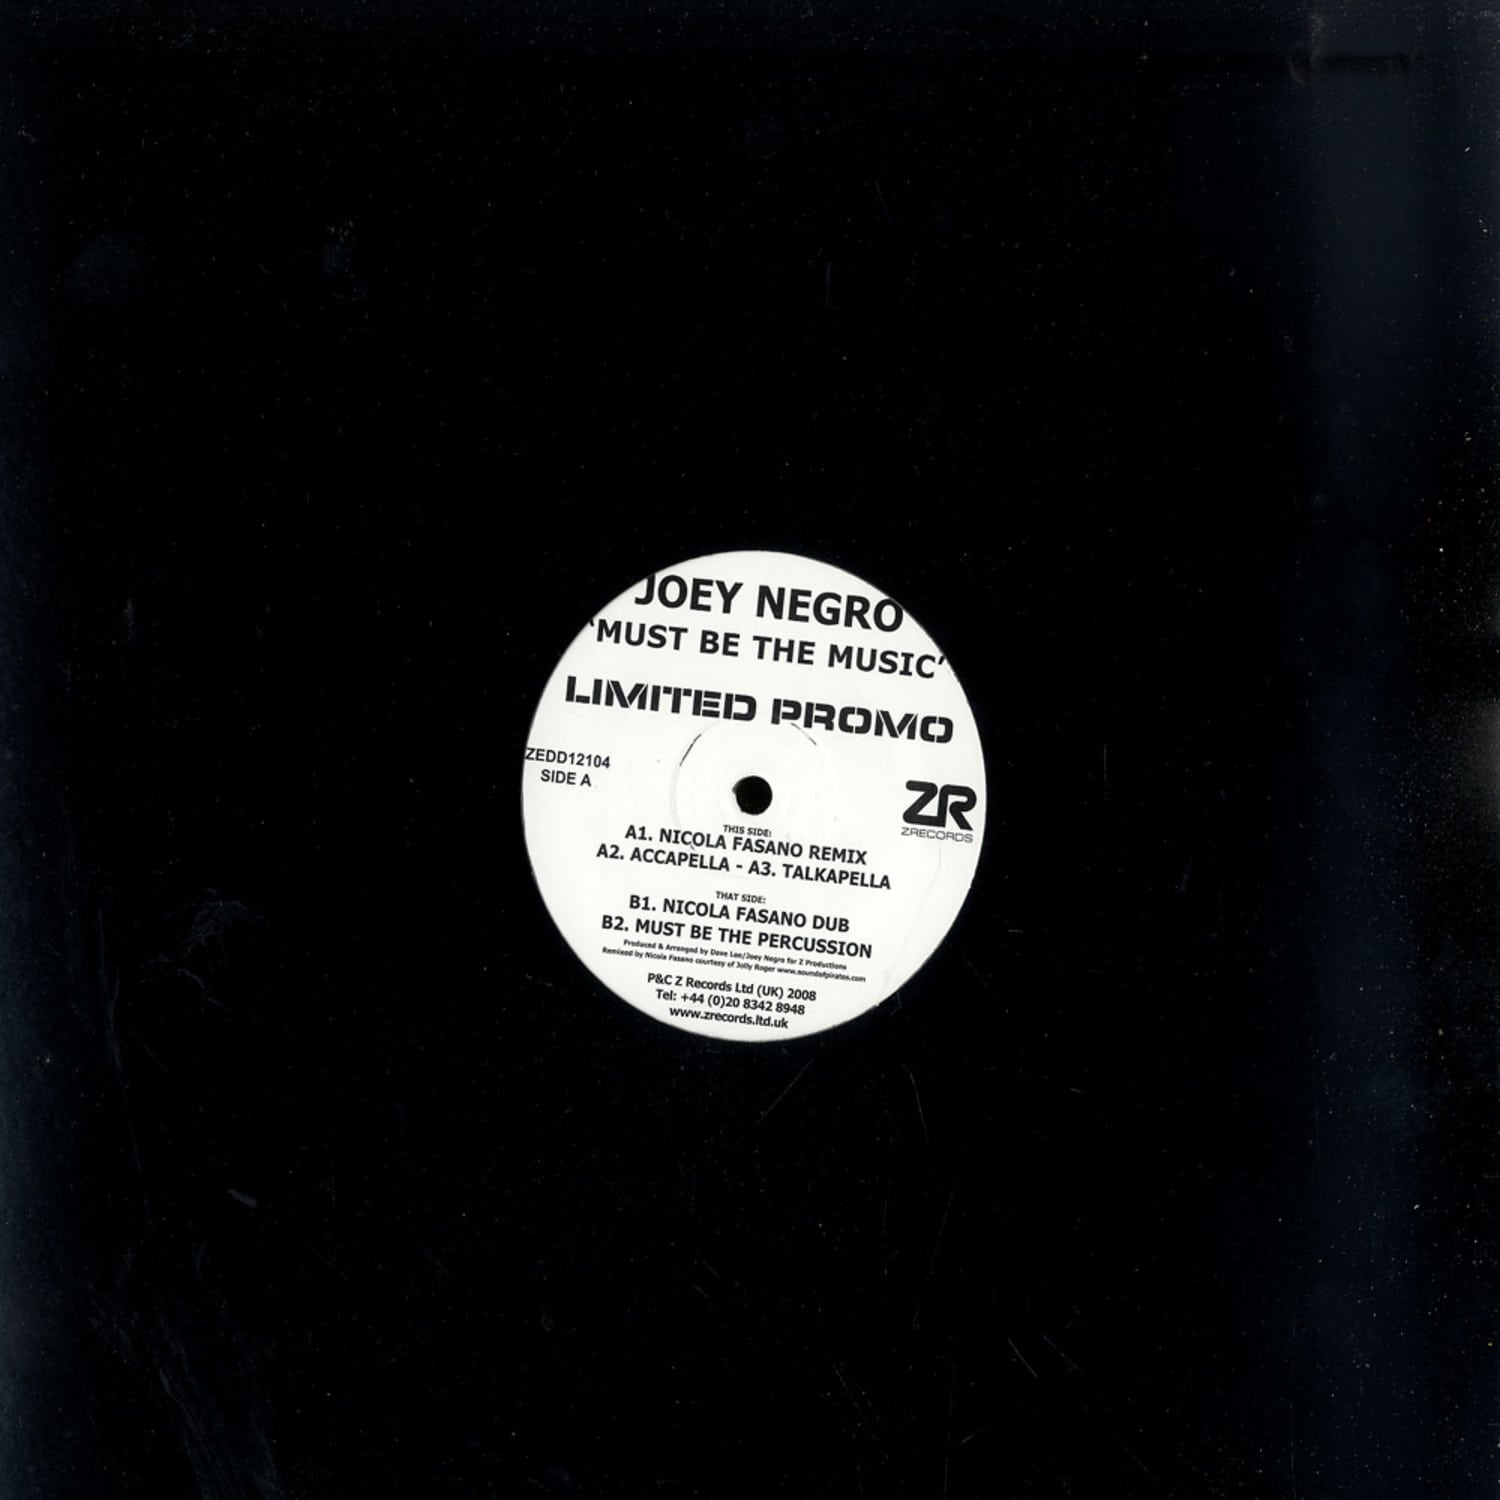 Joey Negro - MUST BE THE MUSIC -LIMITED PROMO-